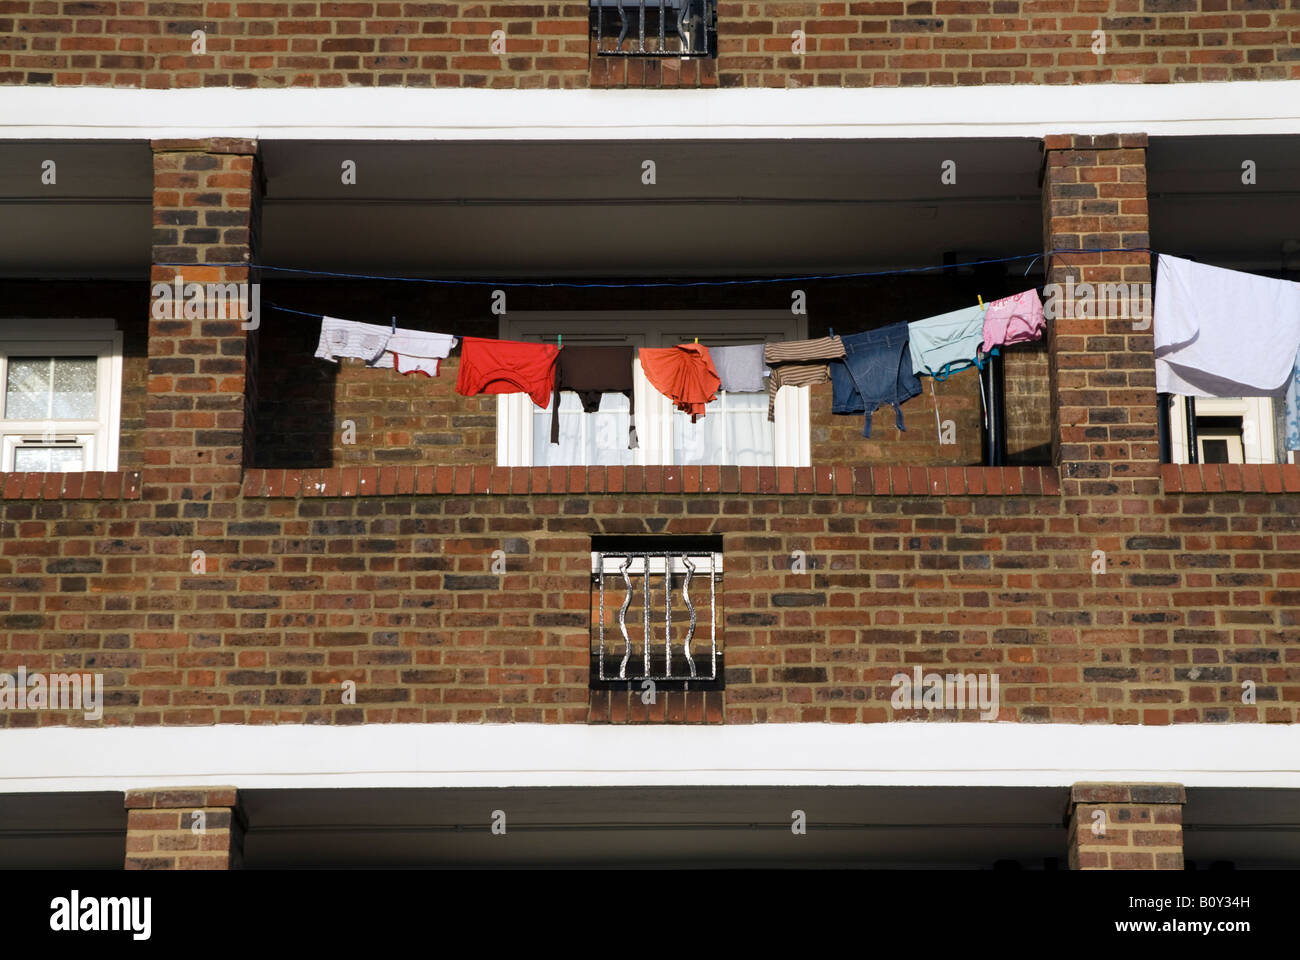 Clothes hanging out to dry on washing line in council estate tower block, London, England, UK Stock Photo